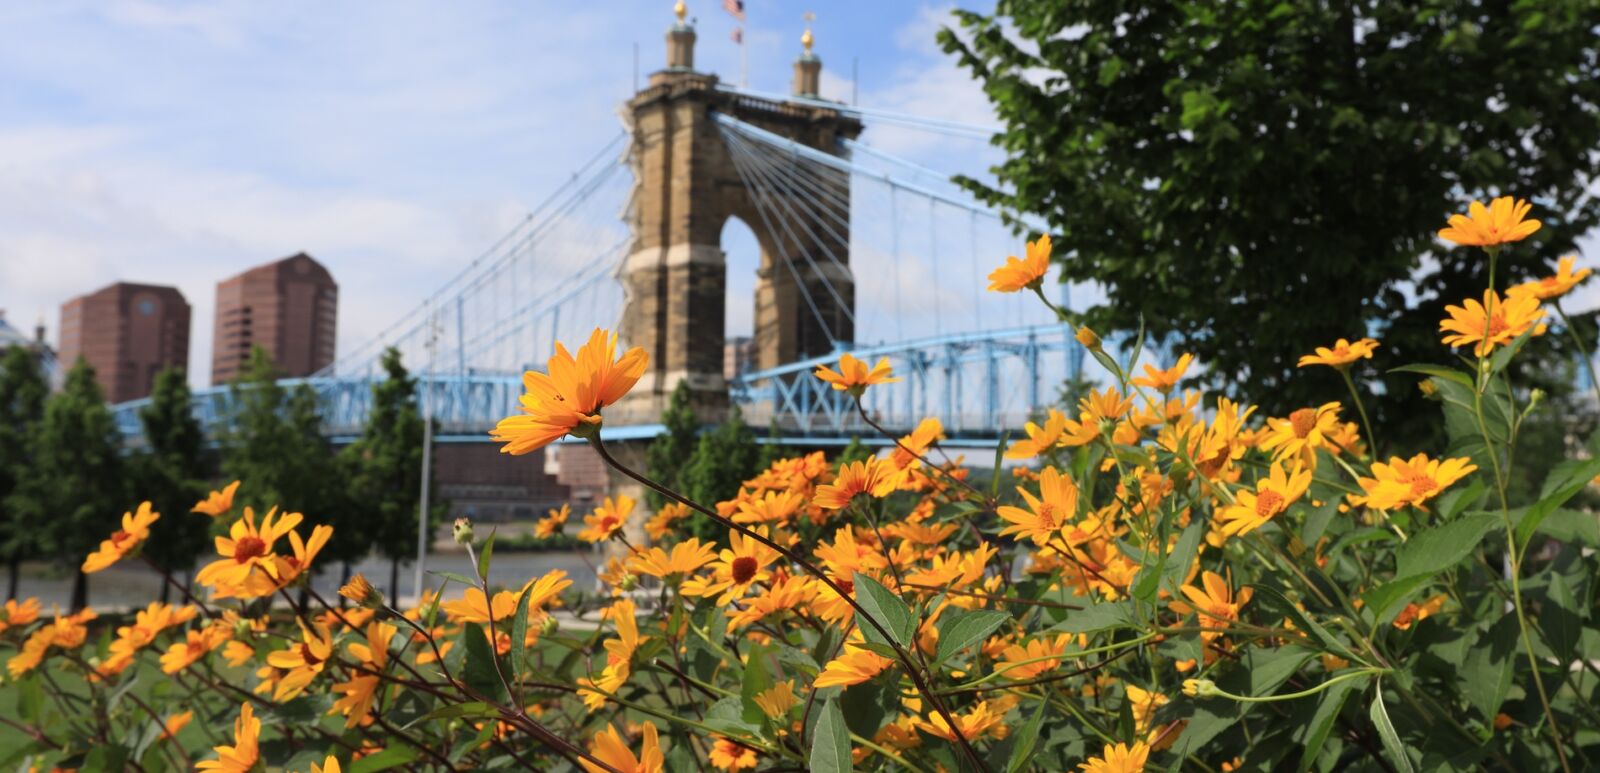 The John A. Roebling Bridge was built in 1866 to connect Covington Kentucky to Cincinnati , Ohio. It spans the Ohio River. Photo by Shutterstock.